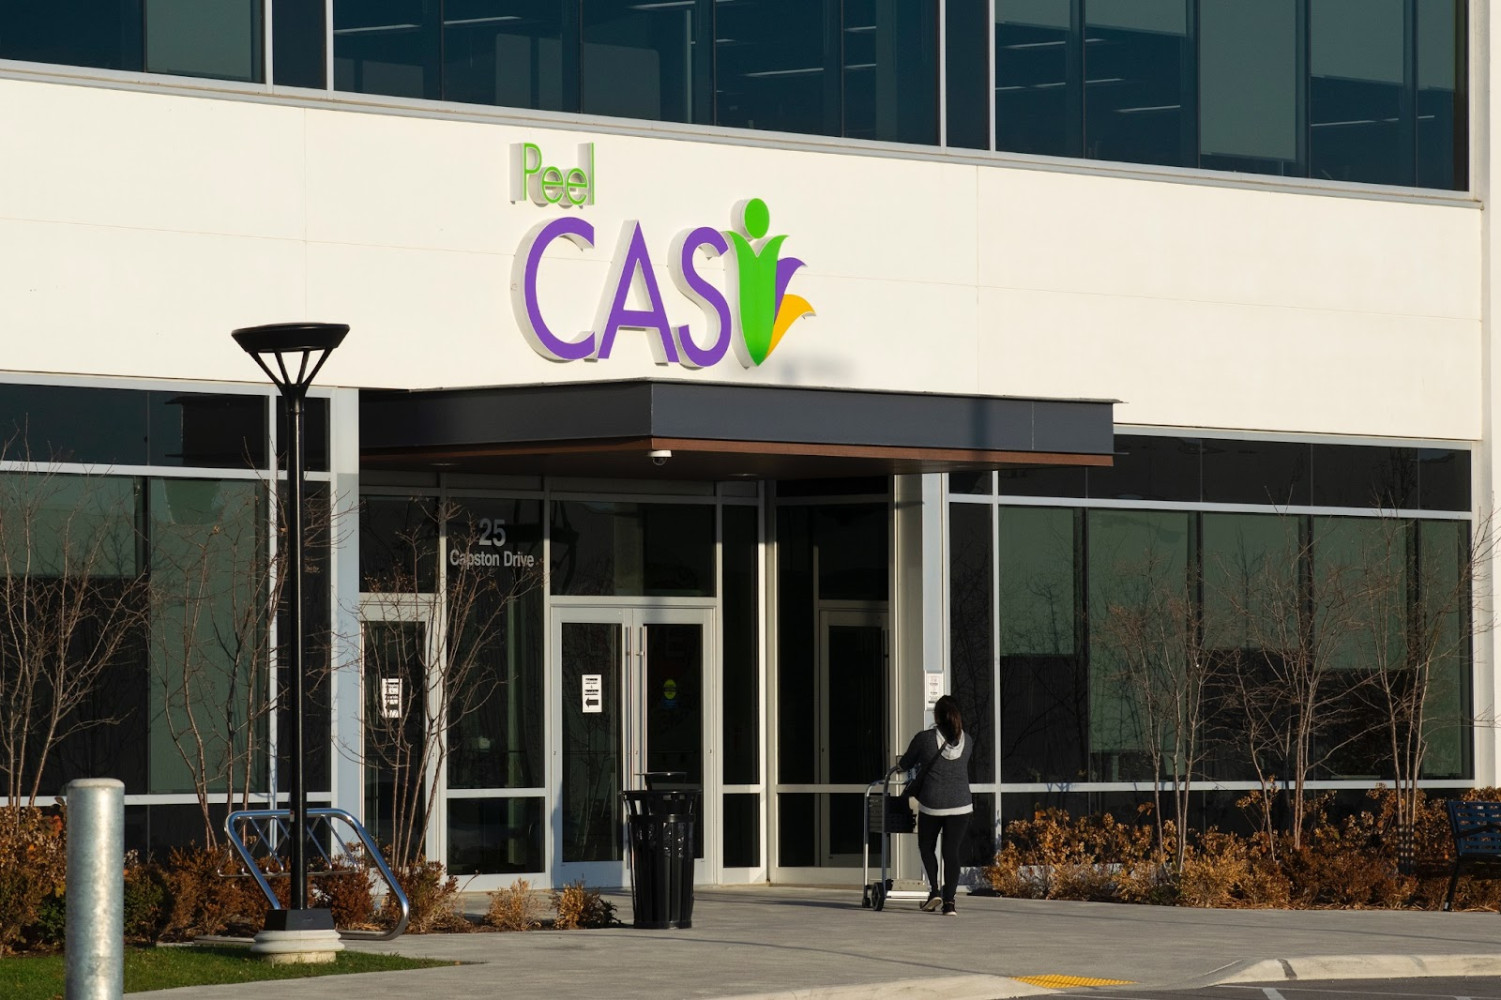 New trial dates set in case against former Peel CAS employee charged with defrauding the organization of more than $250K